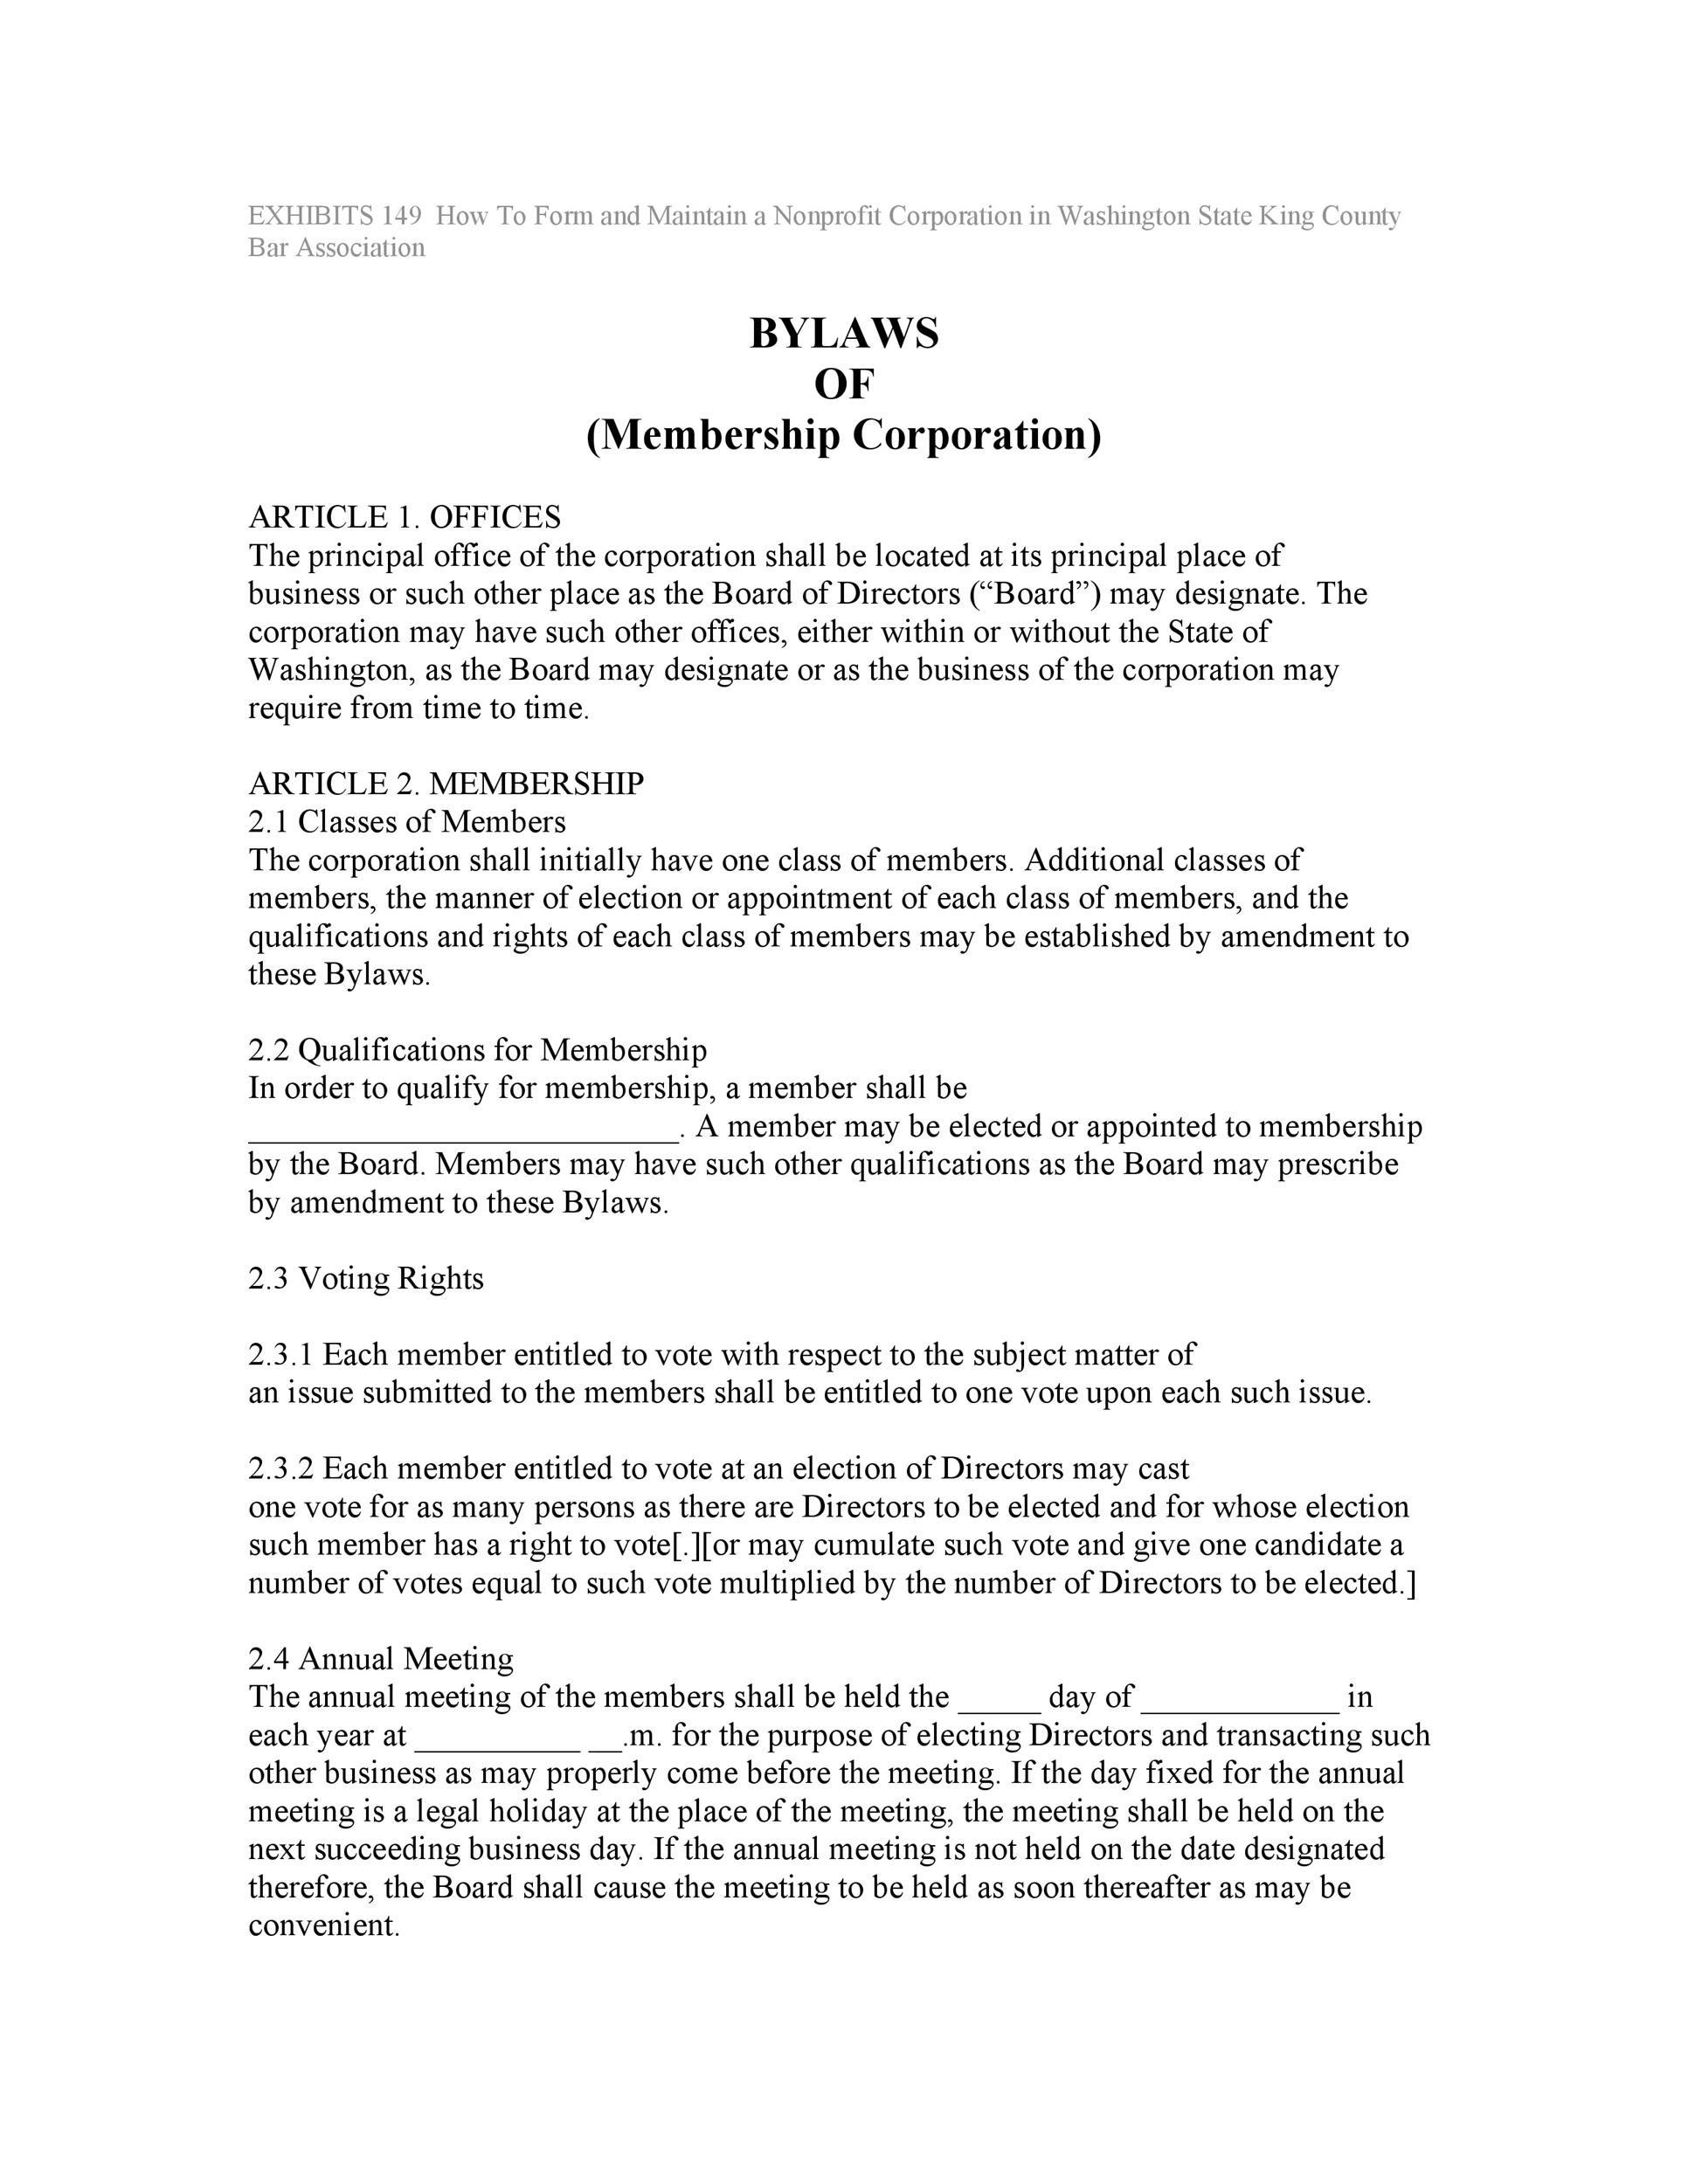  Corporate bylaws template single owner